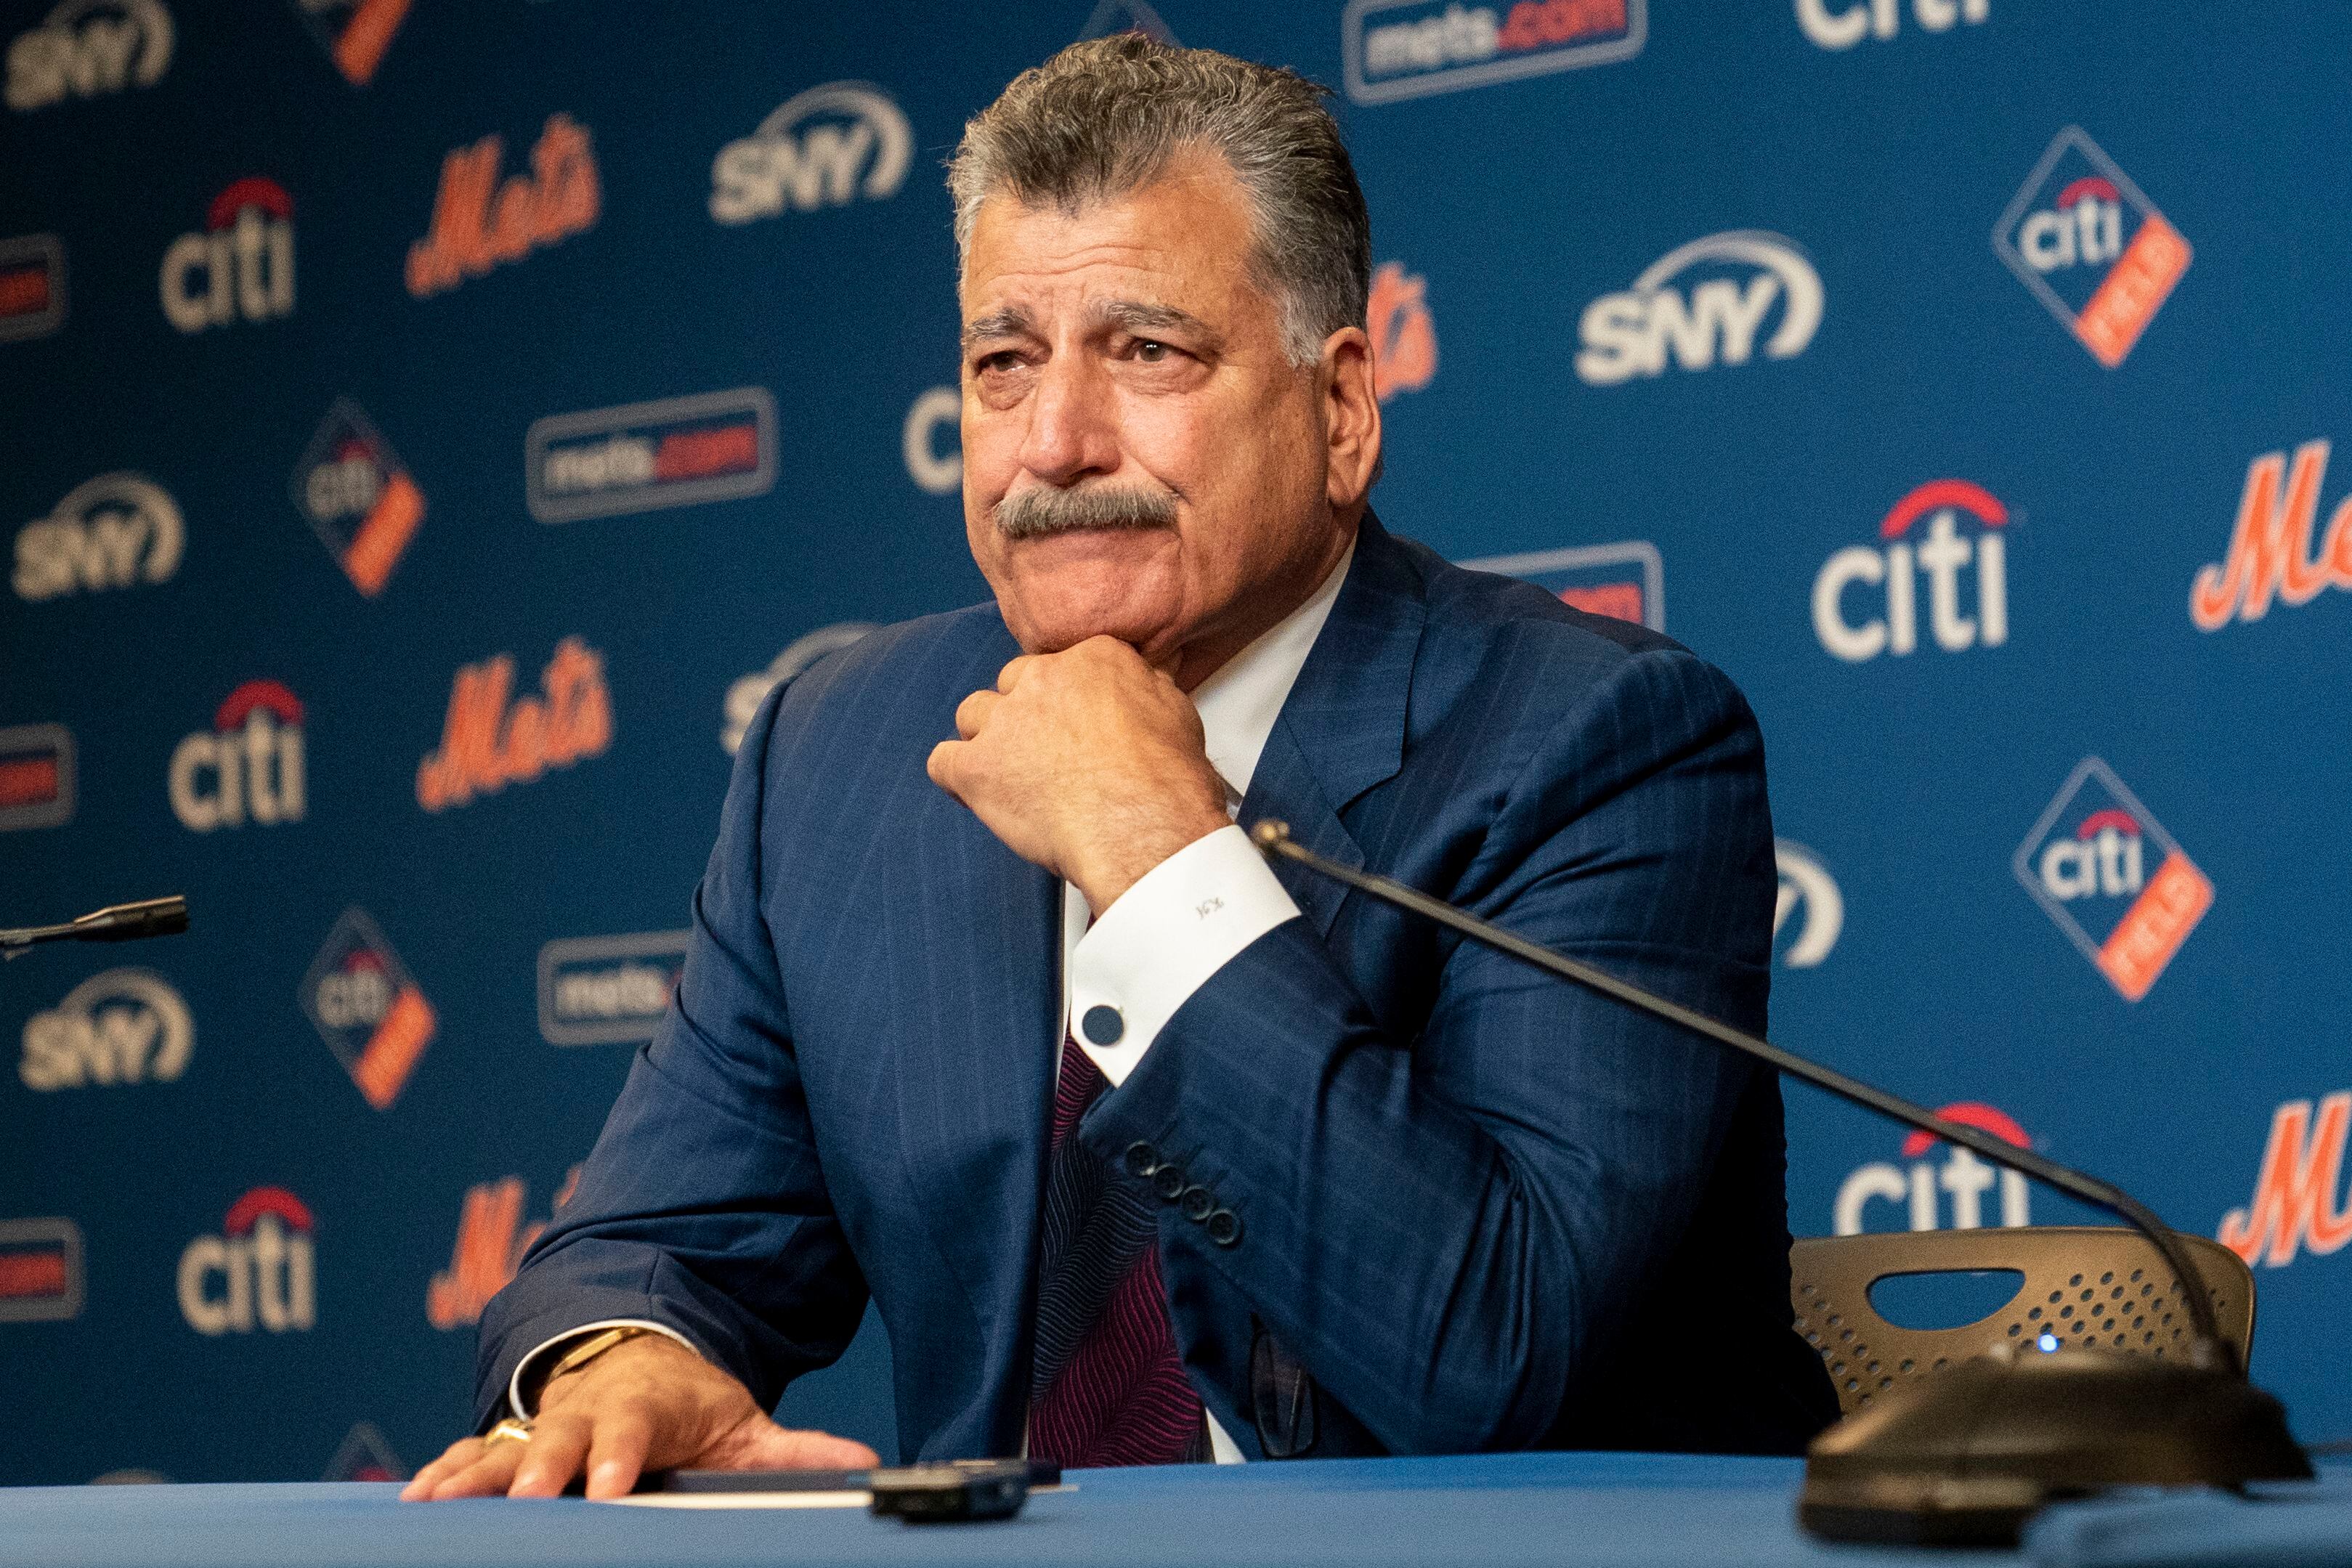 New York Mets announcer and former player Keith Hernandez speaks to the  media during a news conference before a baseball game between the Mets and  Miami Marlins, Saturday, July 9, 2022, in